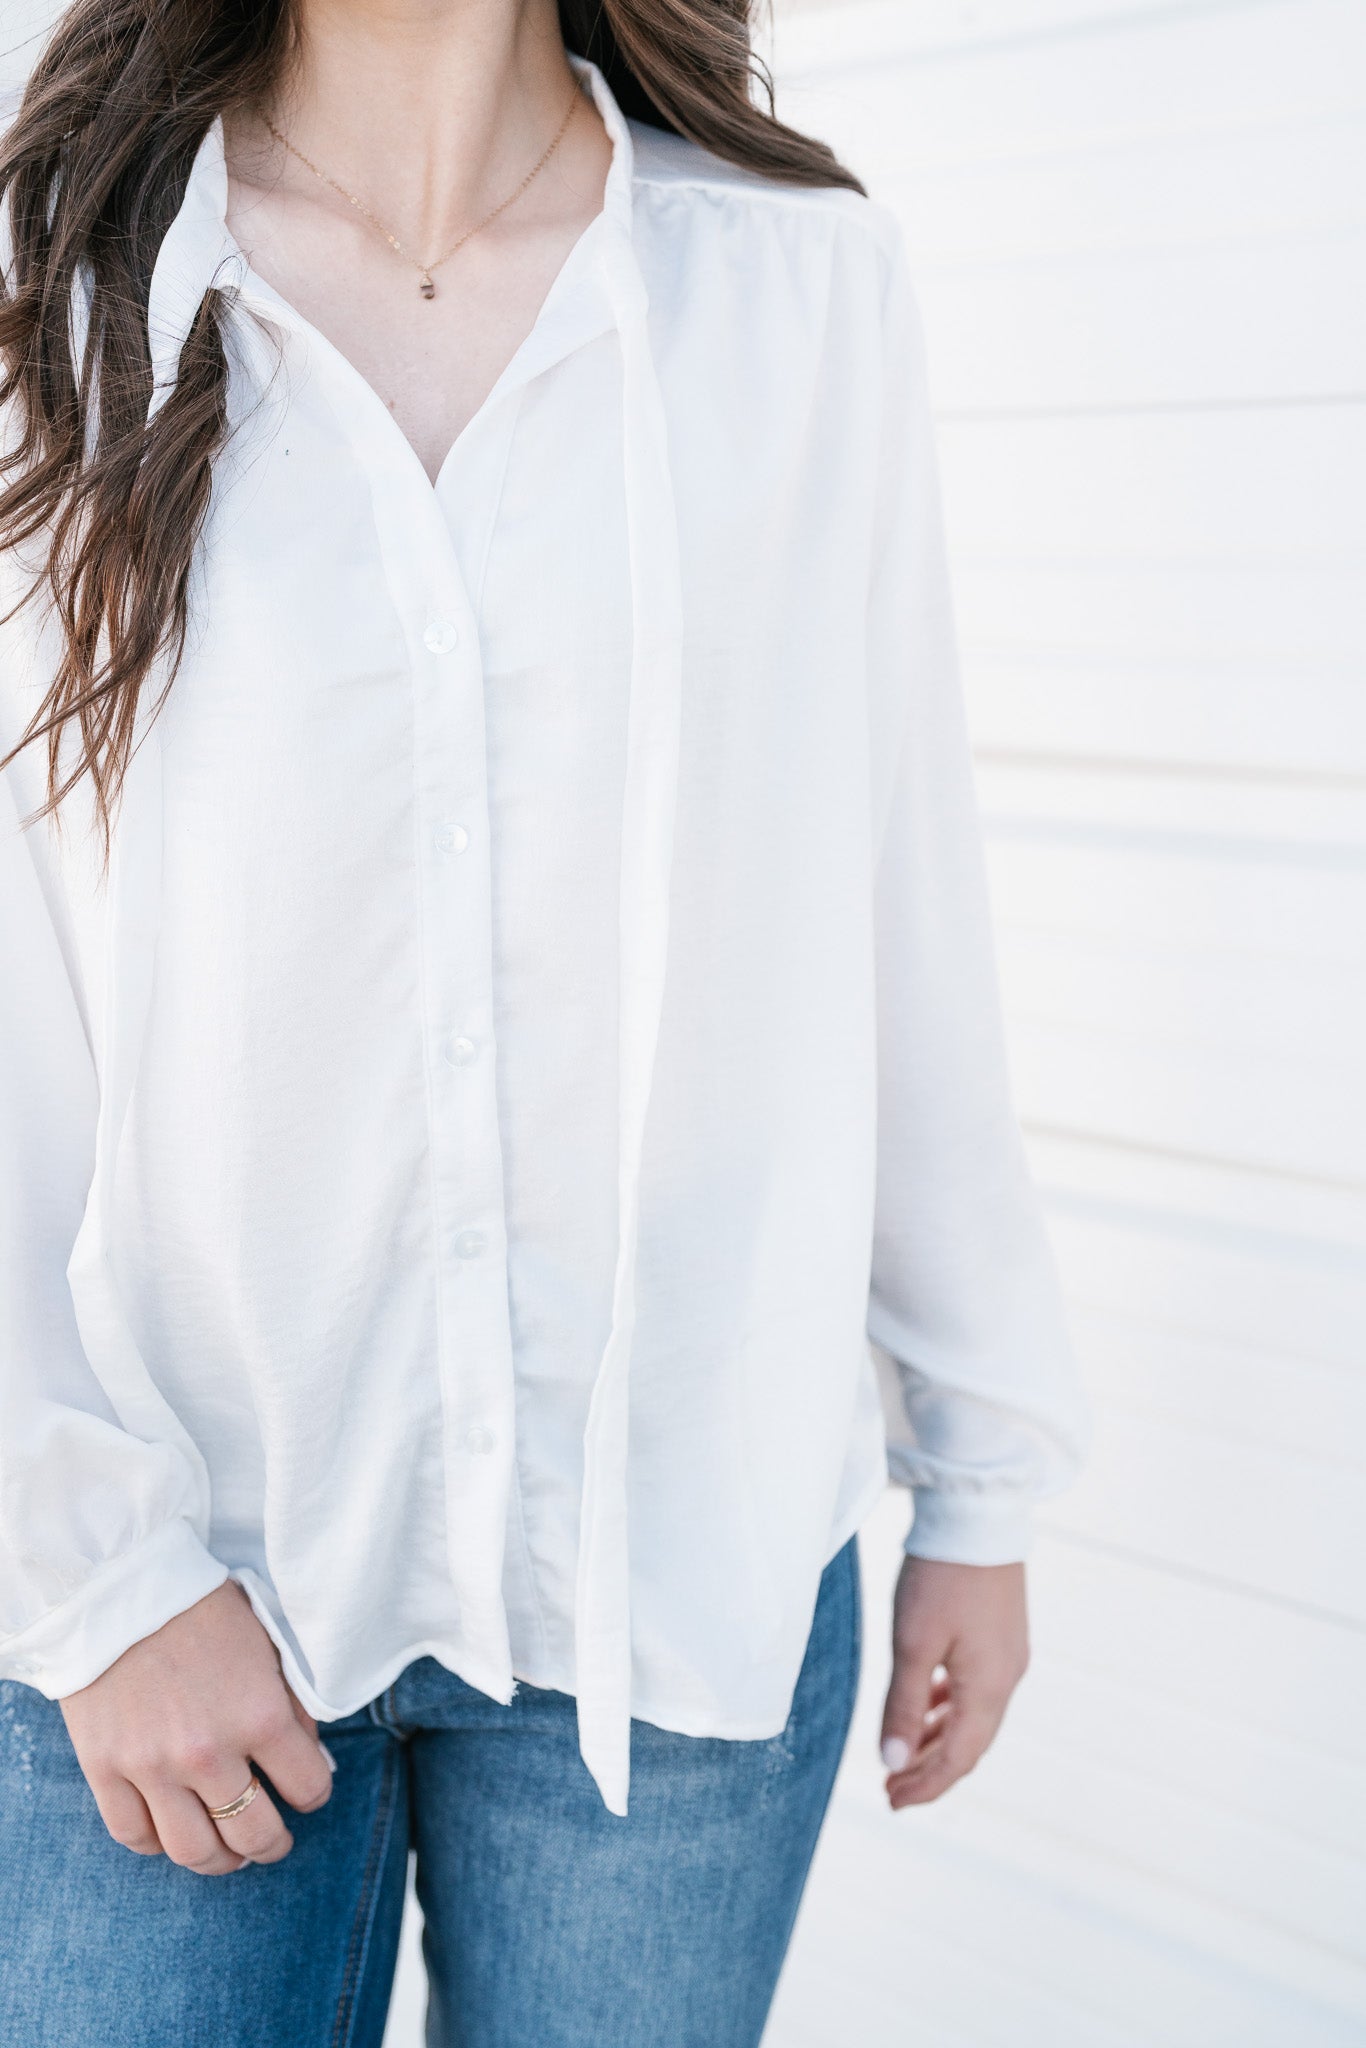 Around The City Button Up Top